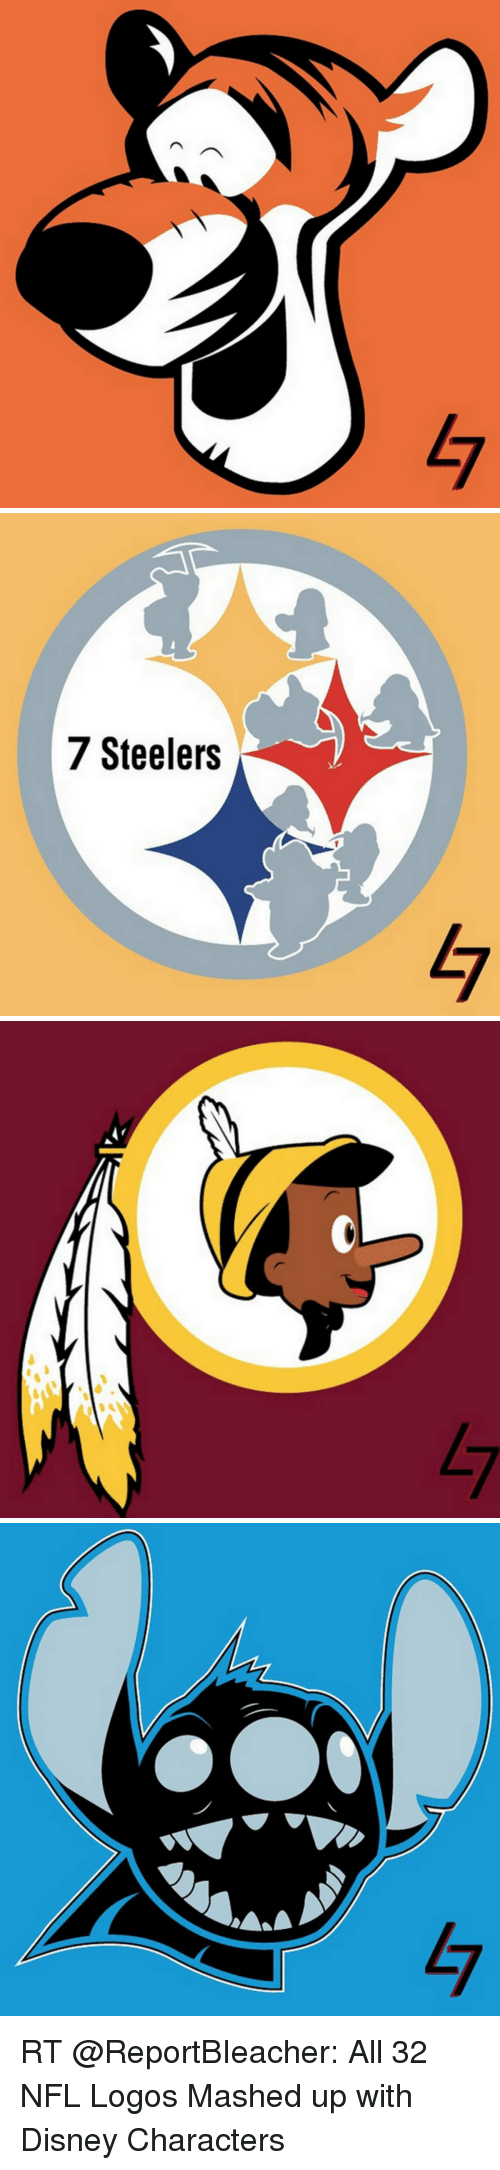 Disney Characters Logo - ㄣ 7 Steelers ノ v RT All 32 NFL Logos Mashed Up With Disney ...